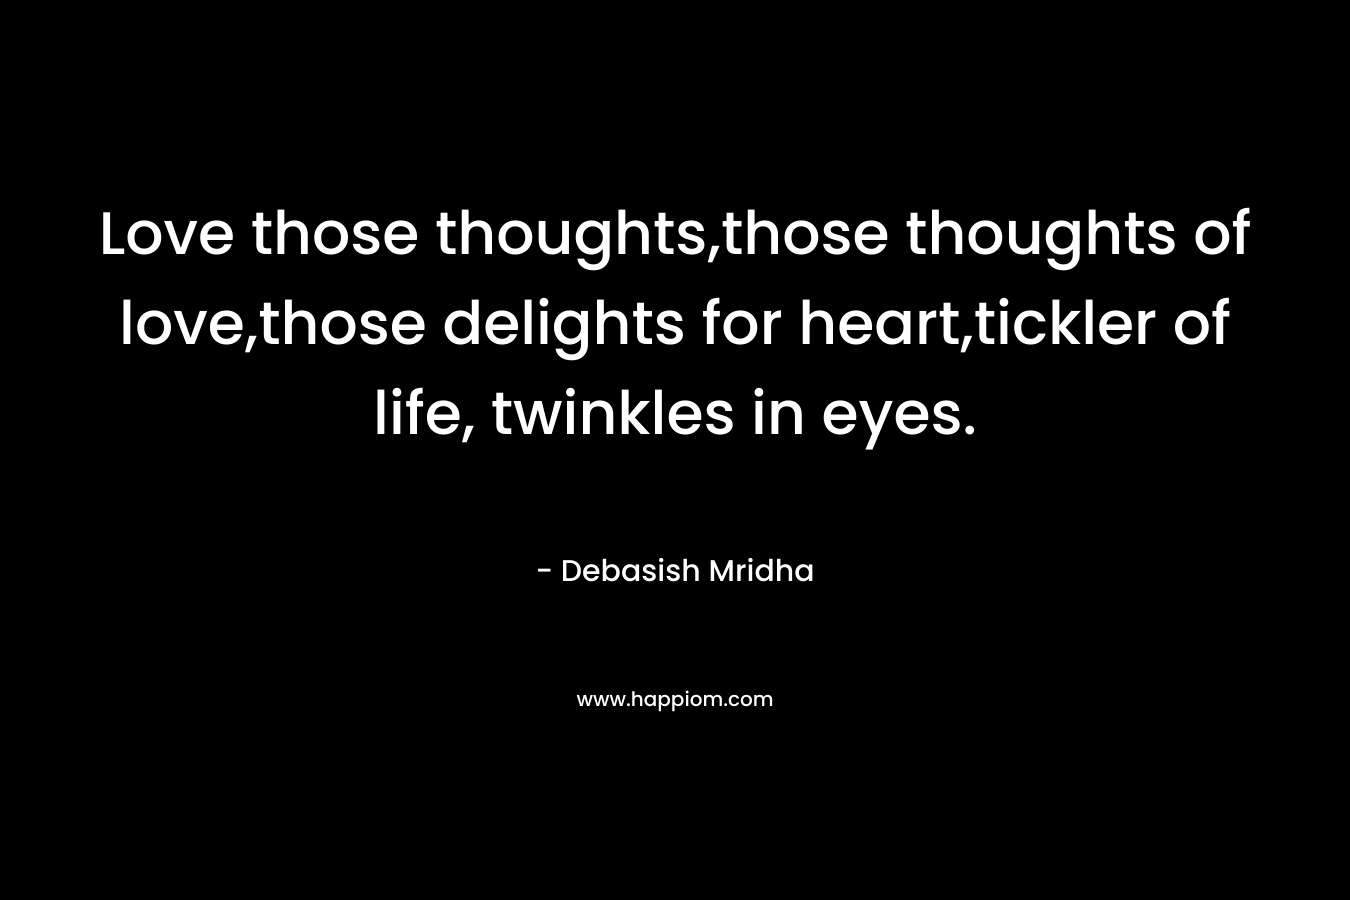 Love those thoughts,those thoughts of love,those delights for heart,tickler of life, twinkles in eyes.